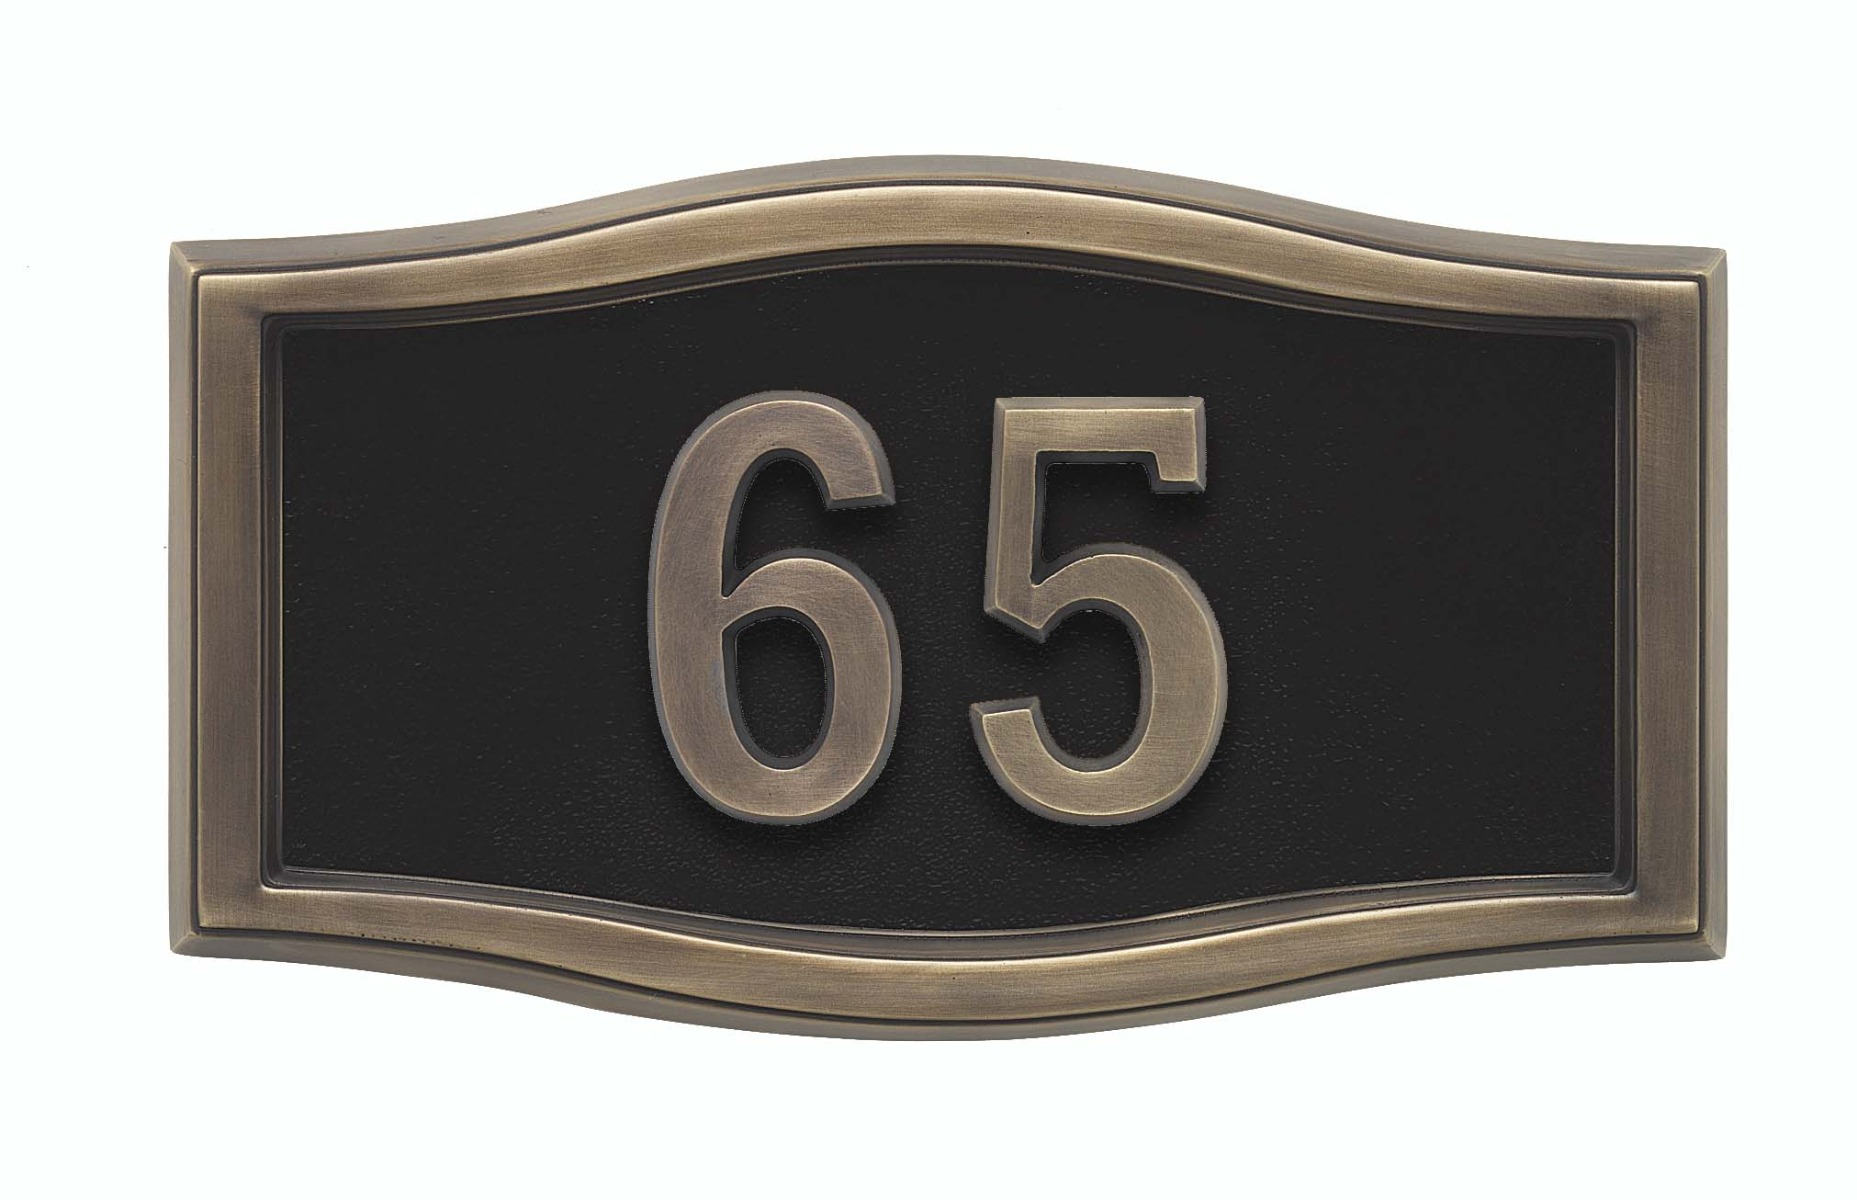 Housemark Small Roundtangle Address Plaques with Trim Color